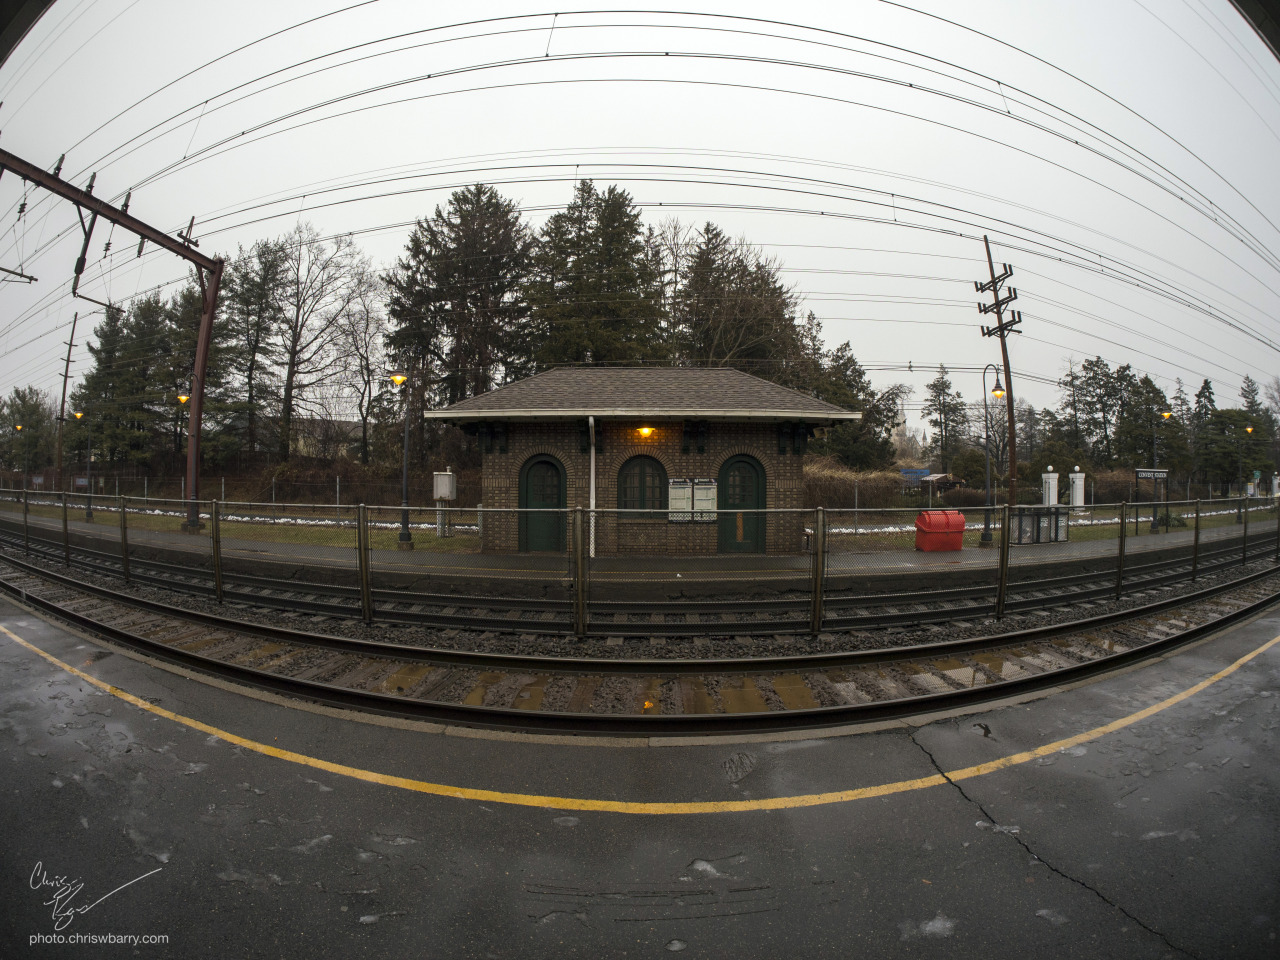 New York pictures featuring fisheye/7.5mm lens